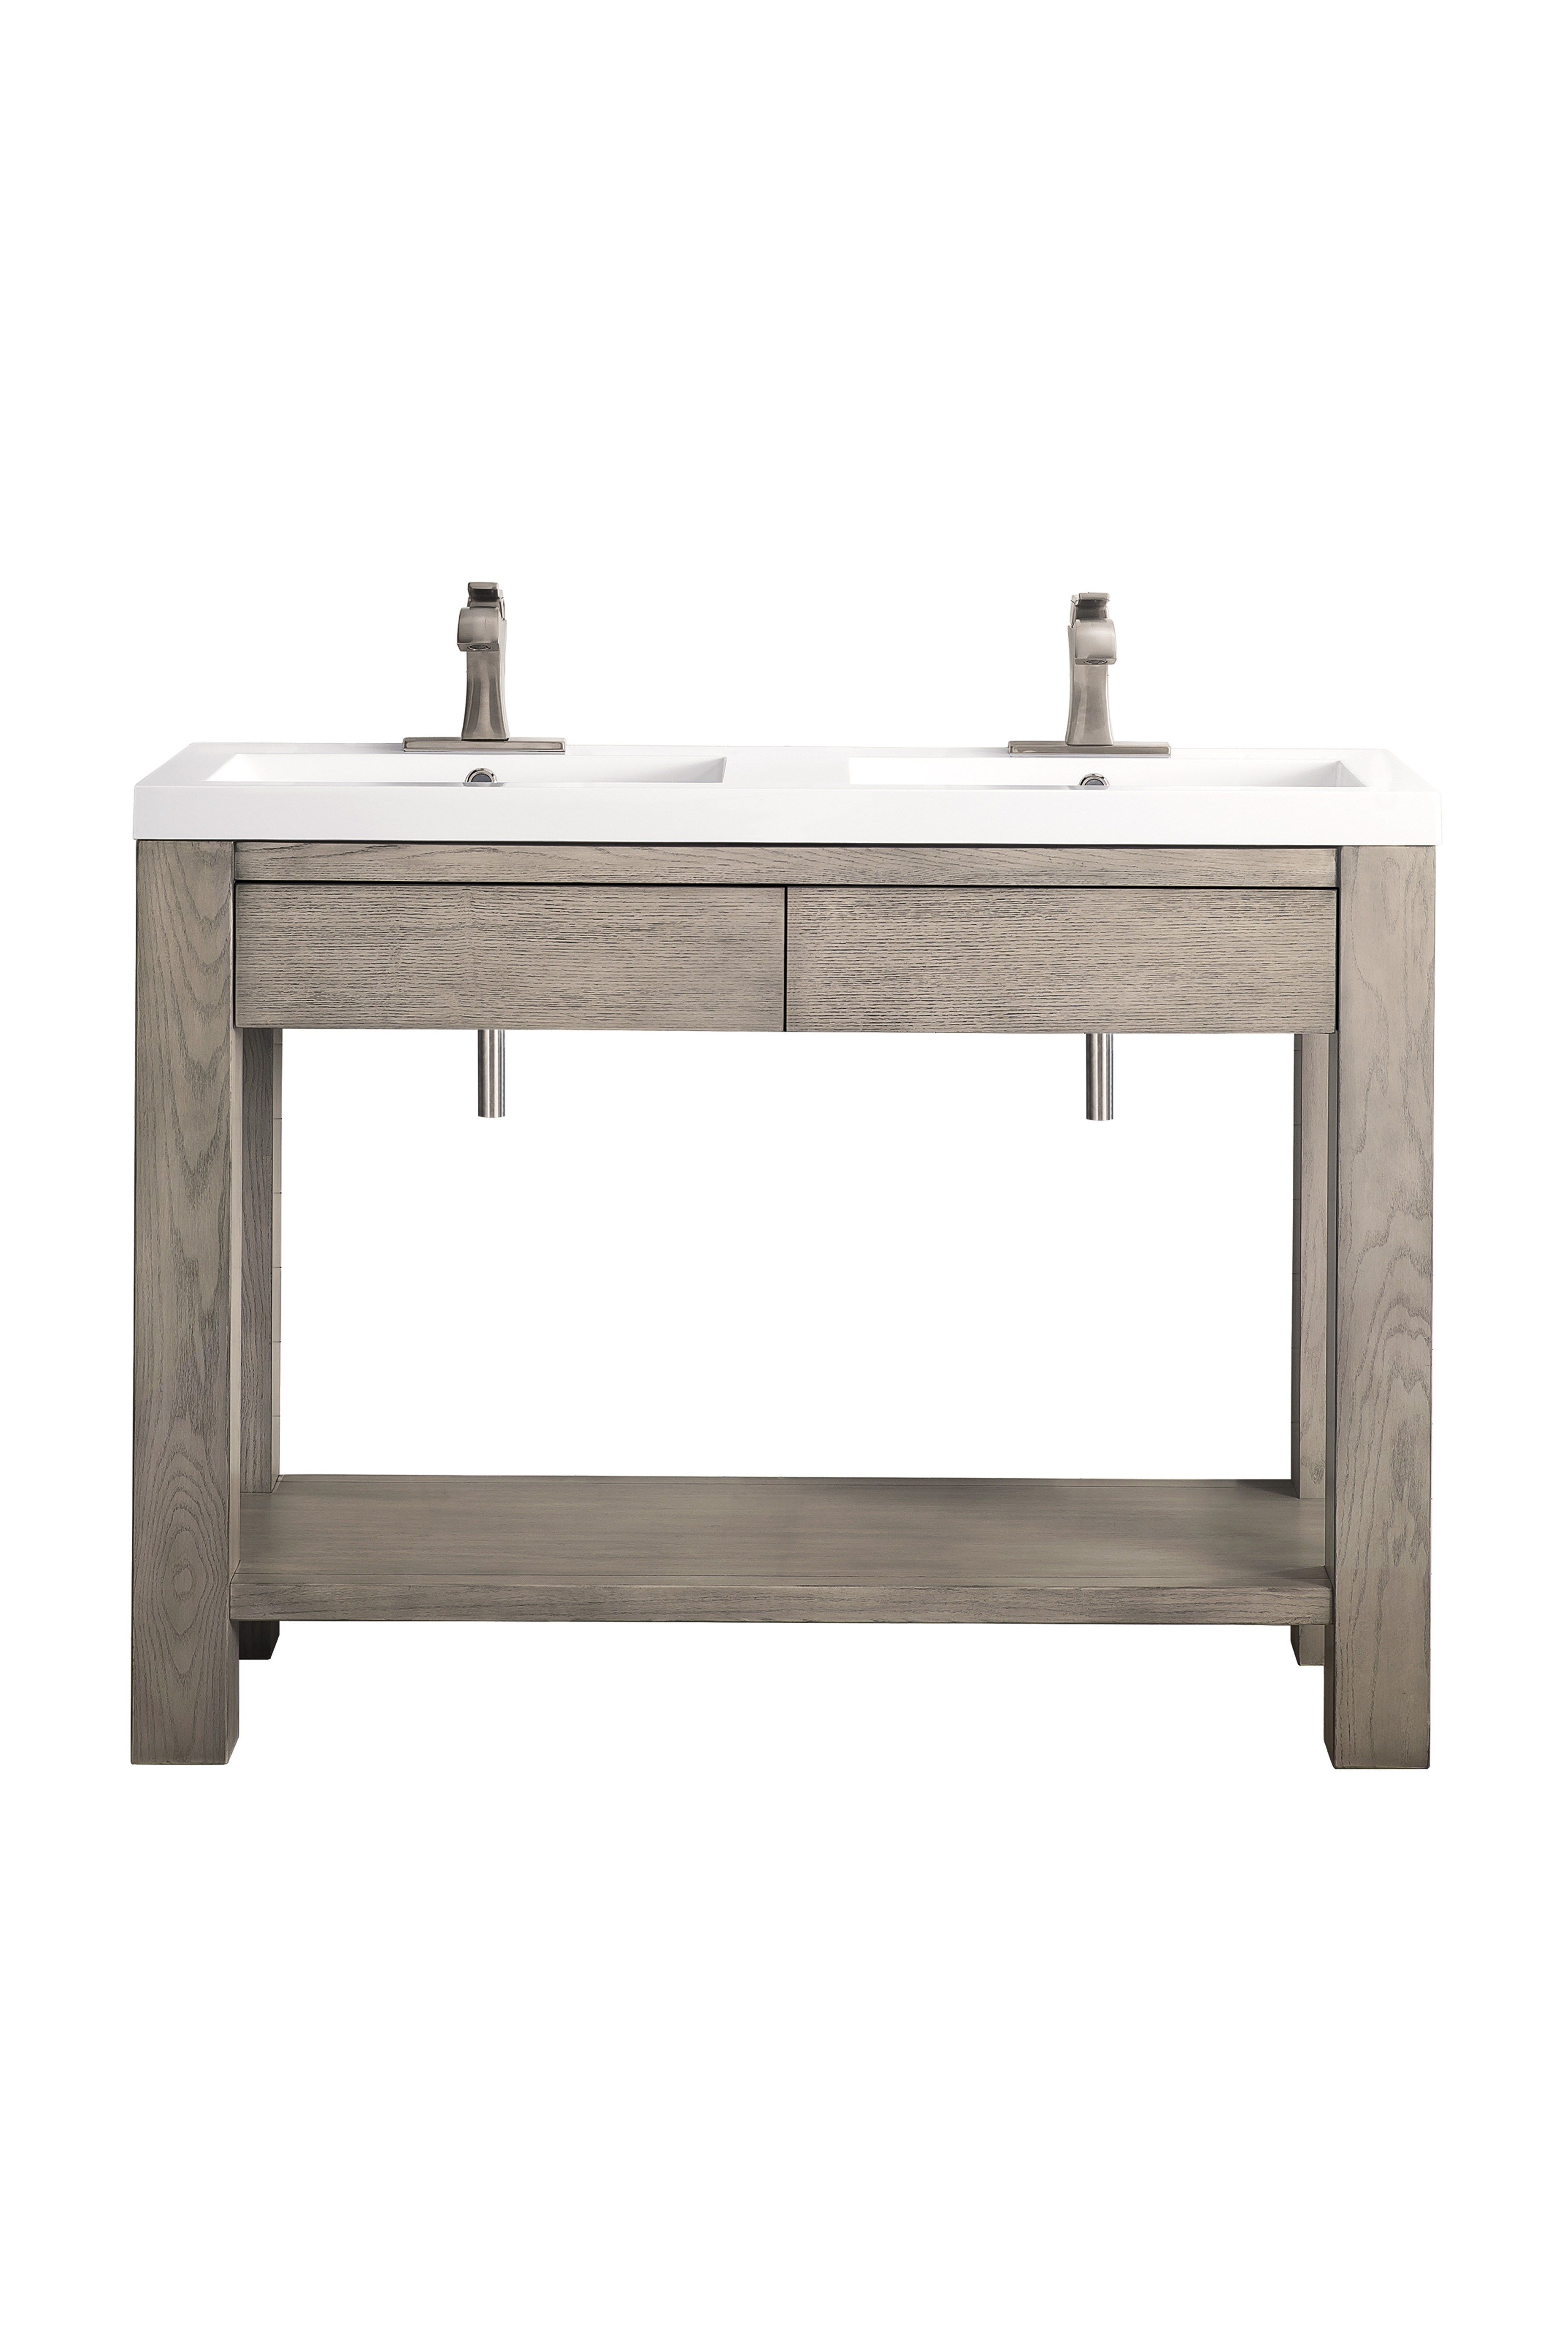 James Martin C205V47PTAWG Brooklyn 47" Wooden Sink Console, Platinum Ash w/ White Glossy Composite Countertop